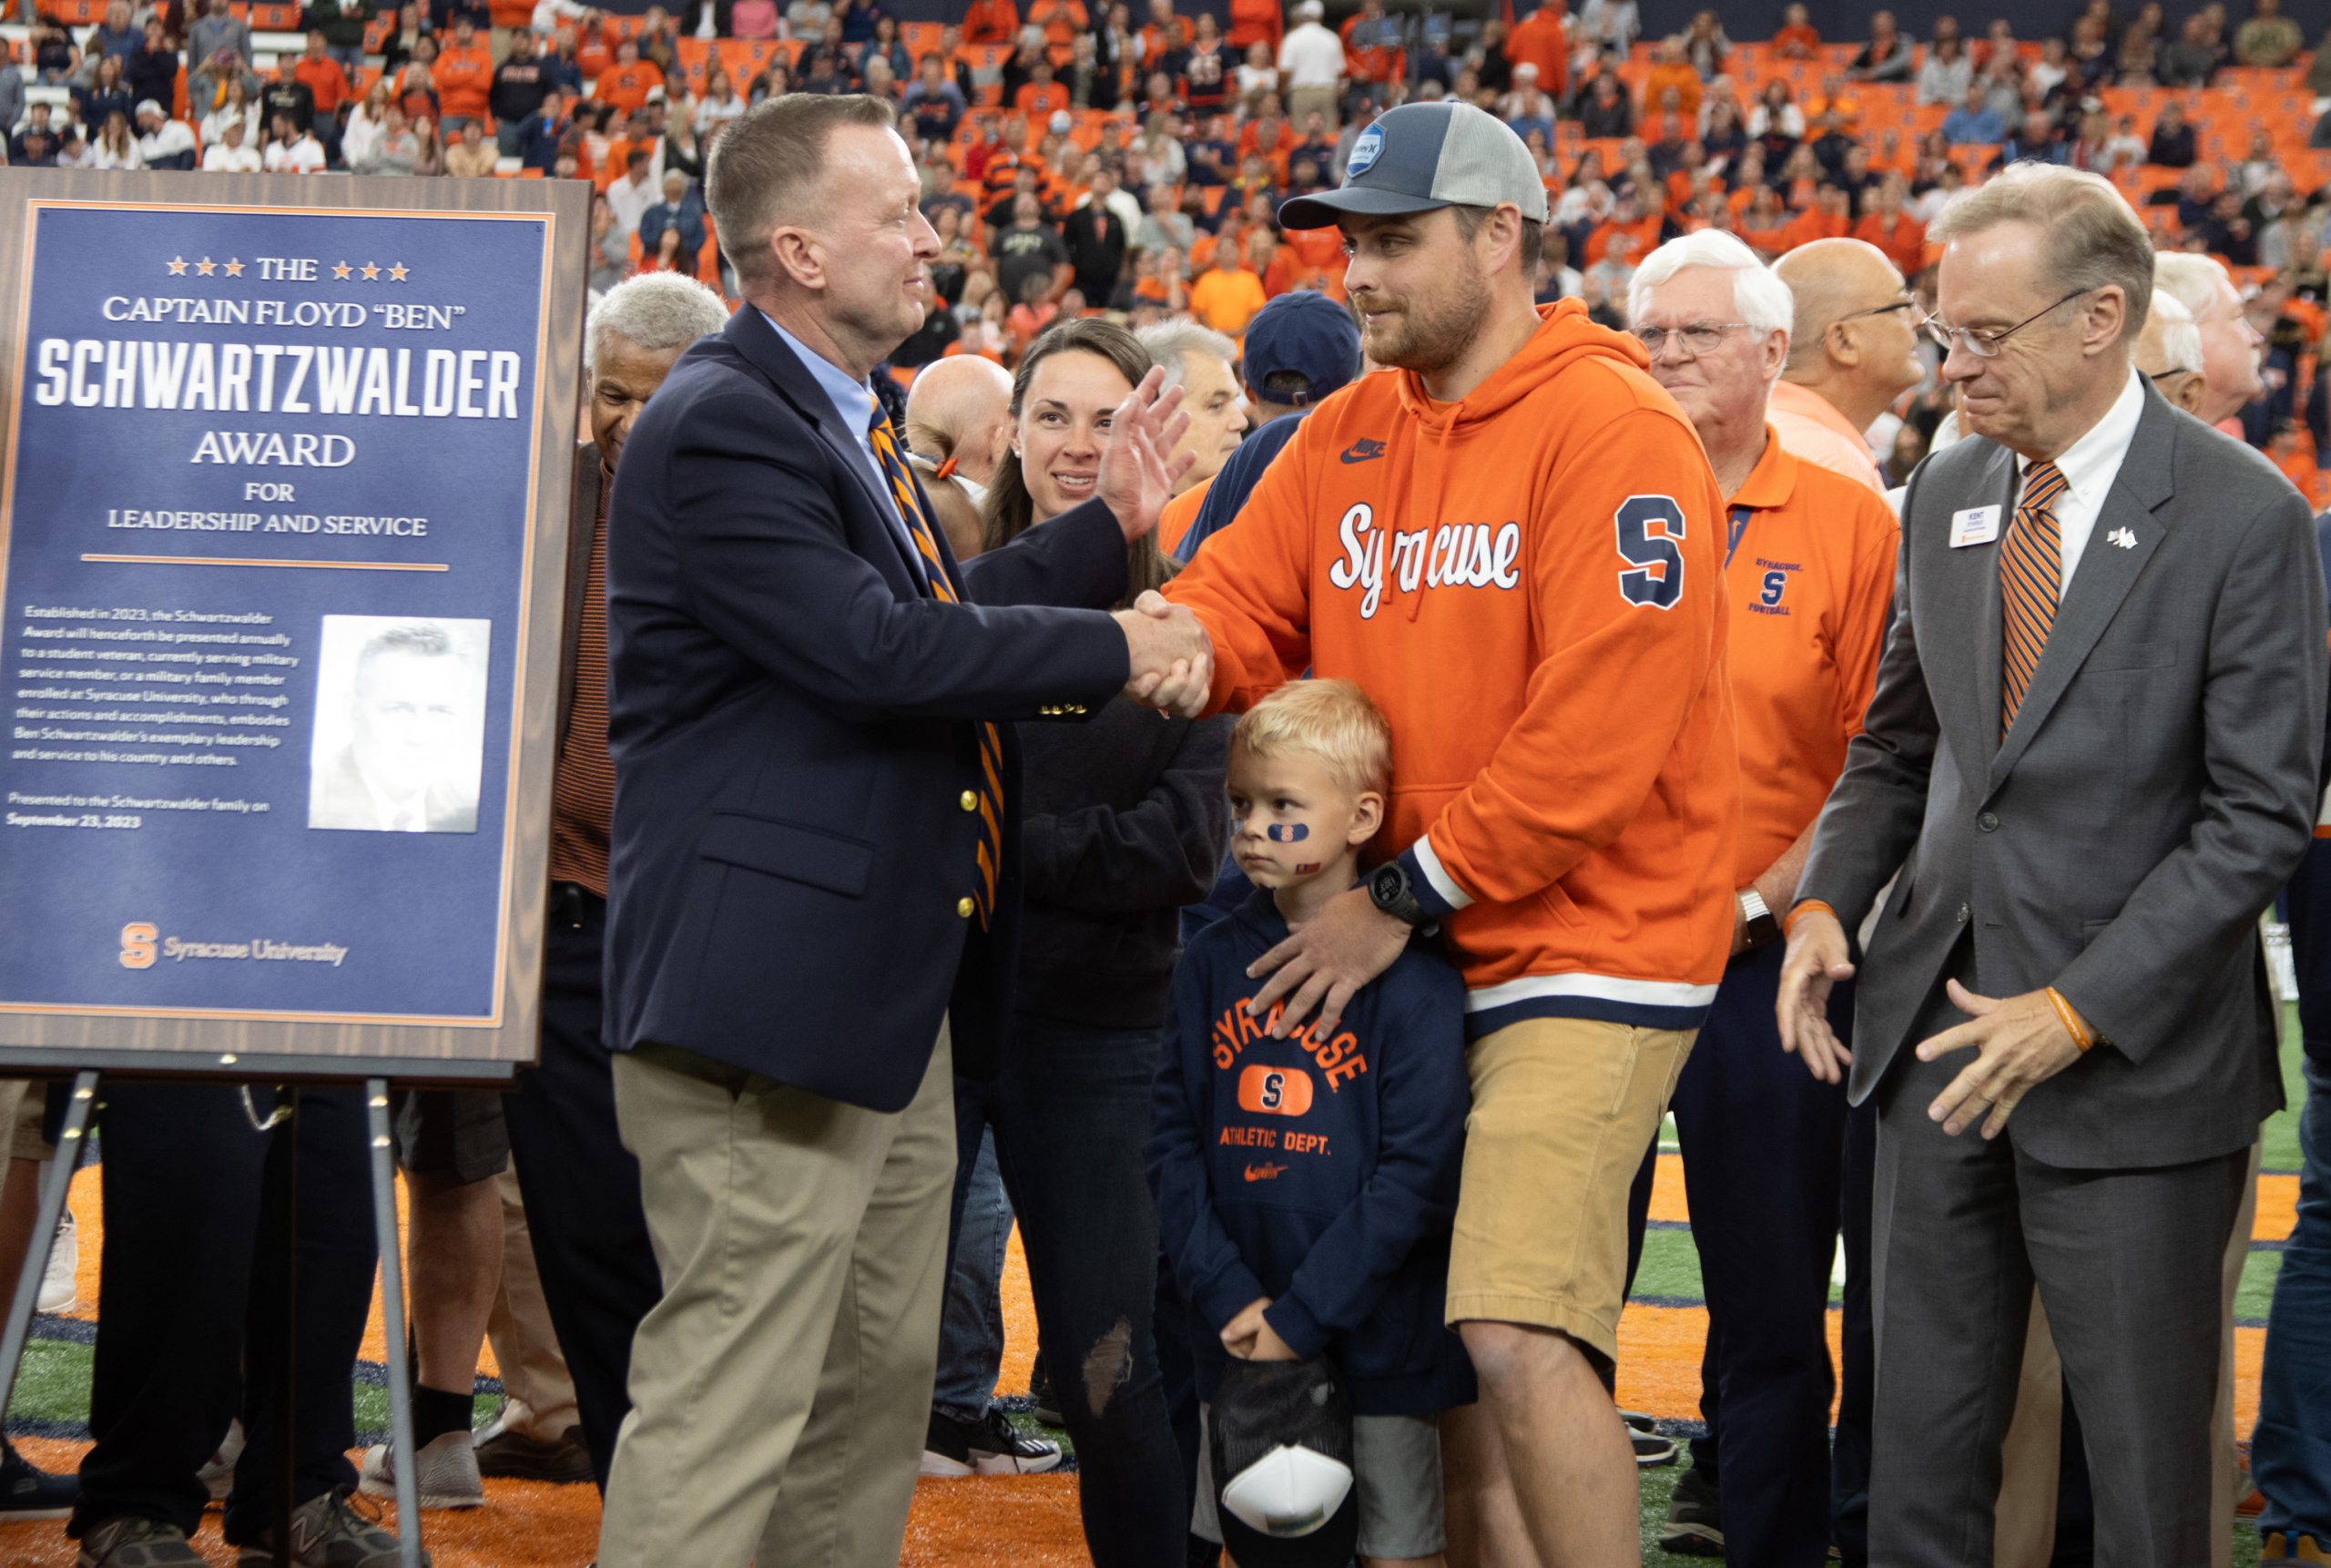 Mike Haynie shaking the hand of a man standing with his boy on the field in the Dome. 